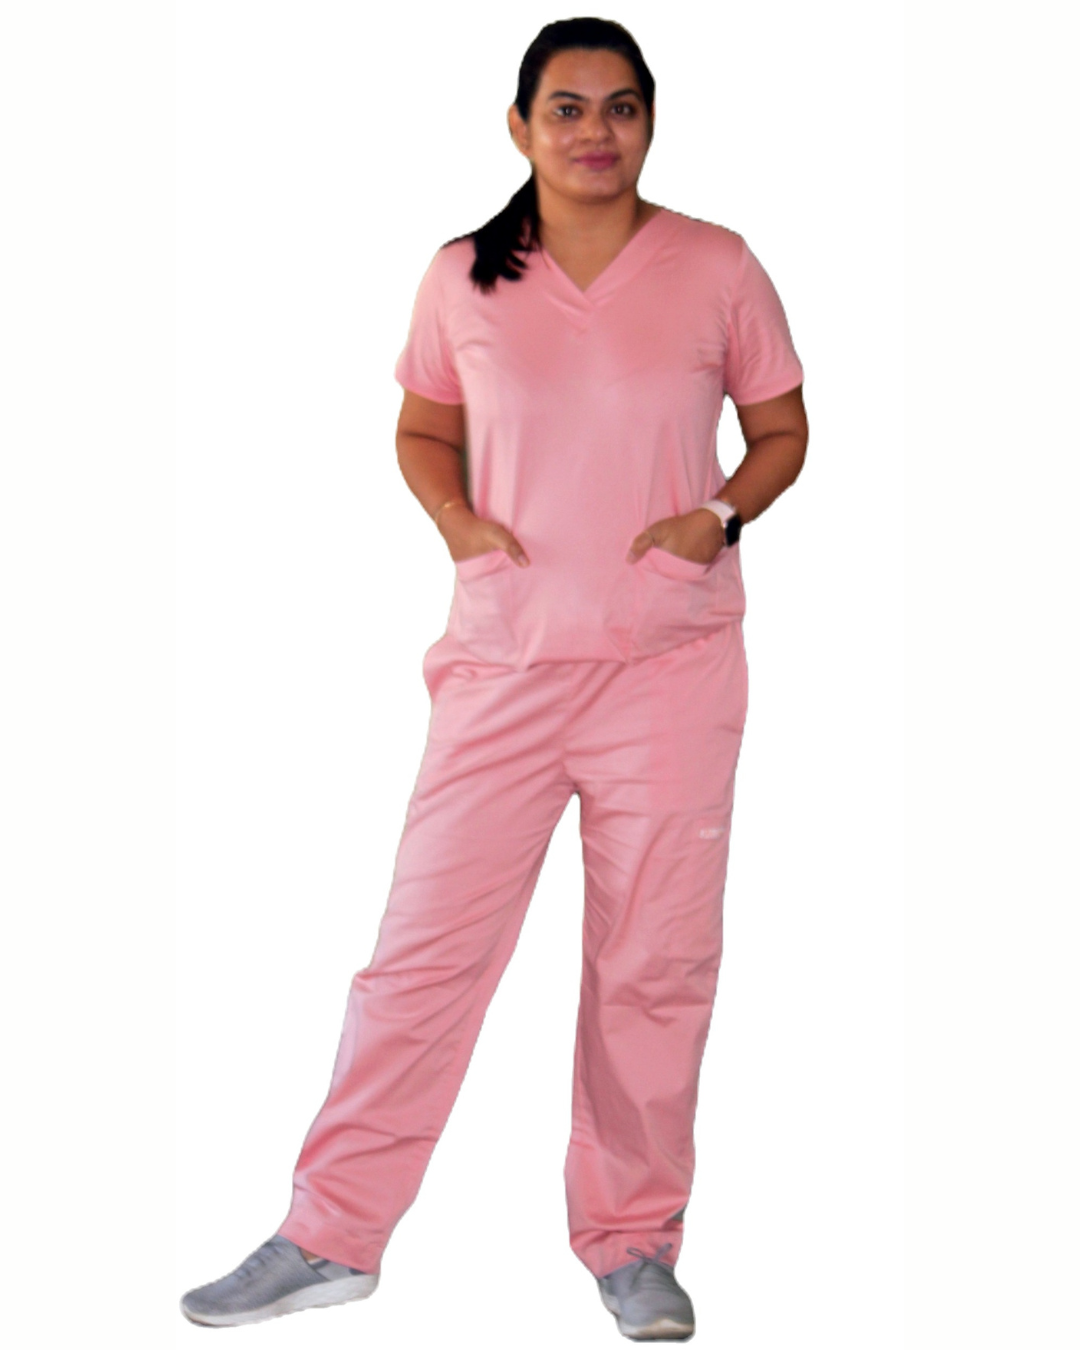 Cotton Scrub top for female in pink colour